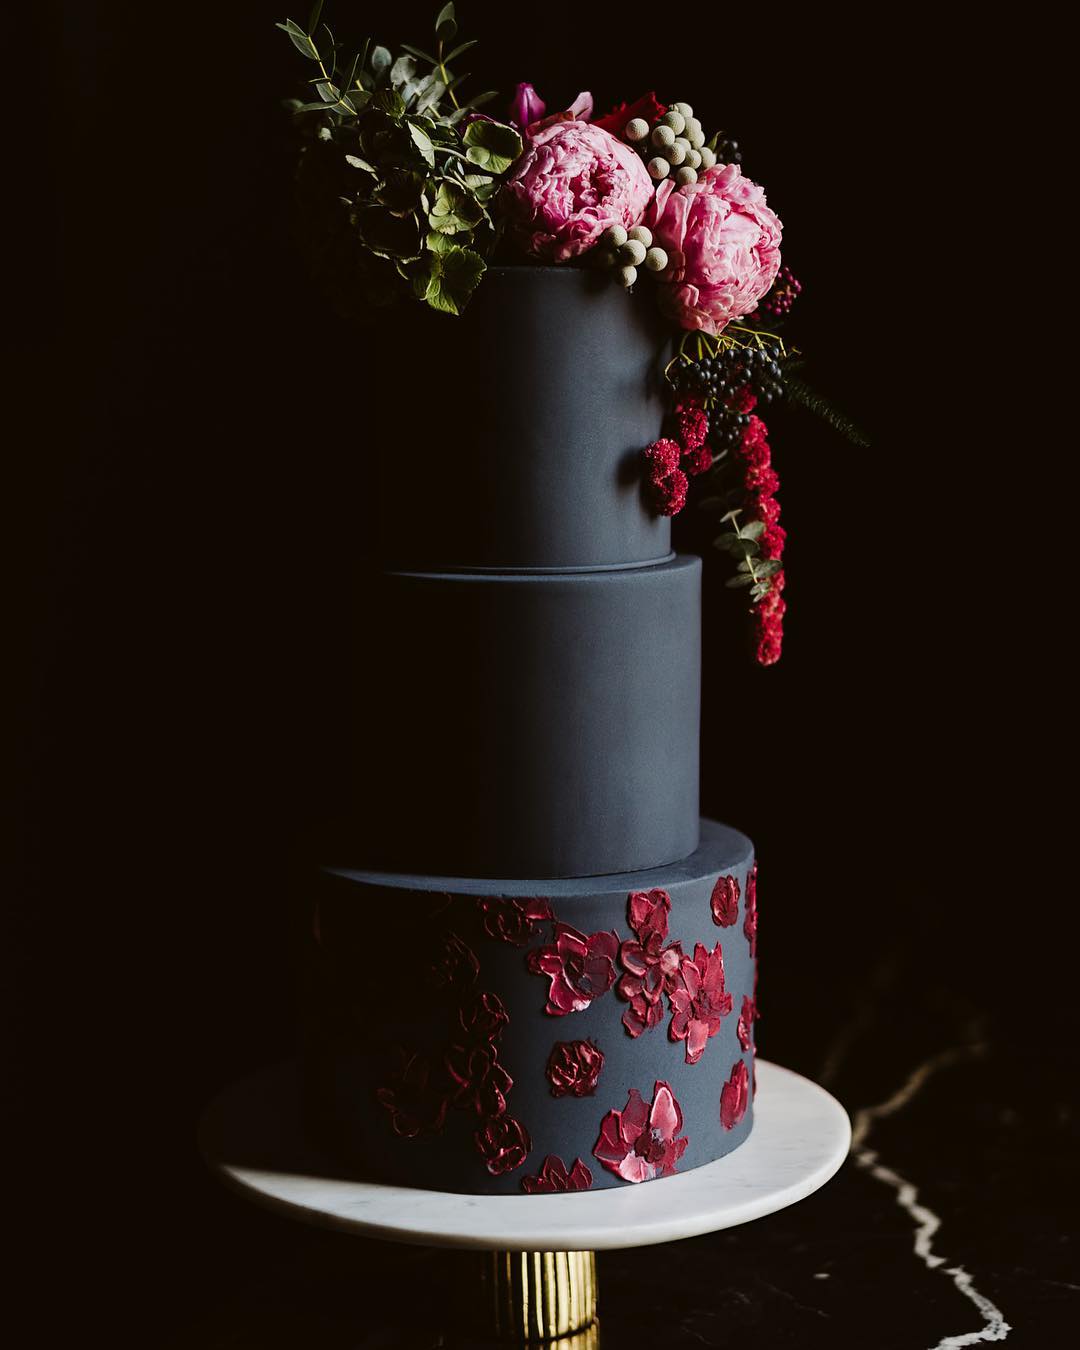 a 3-tiered black wedding cake covered in pink and red flowers